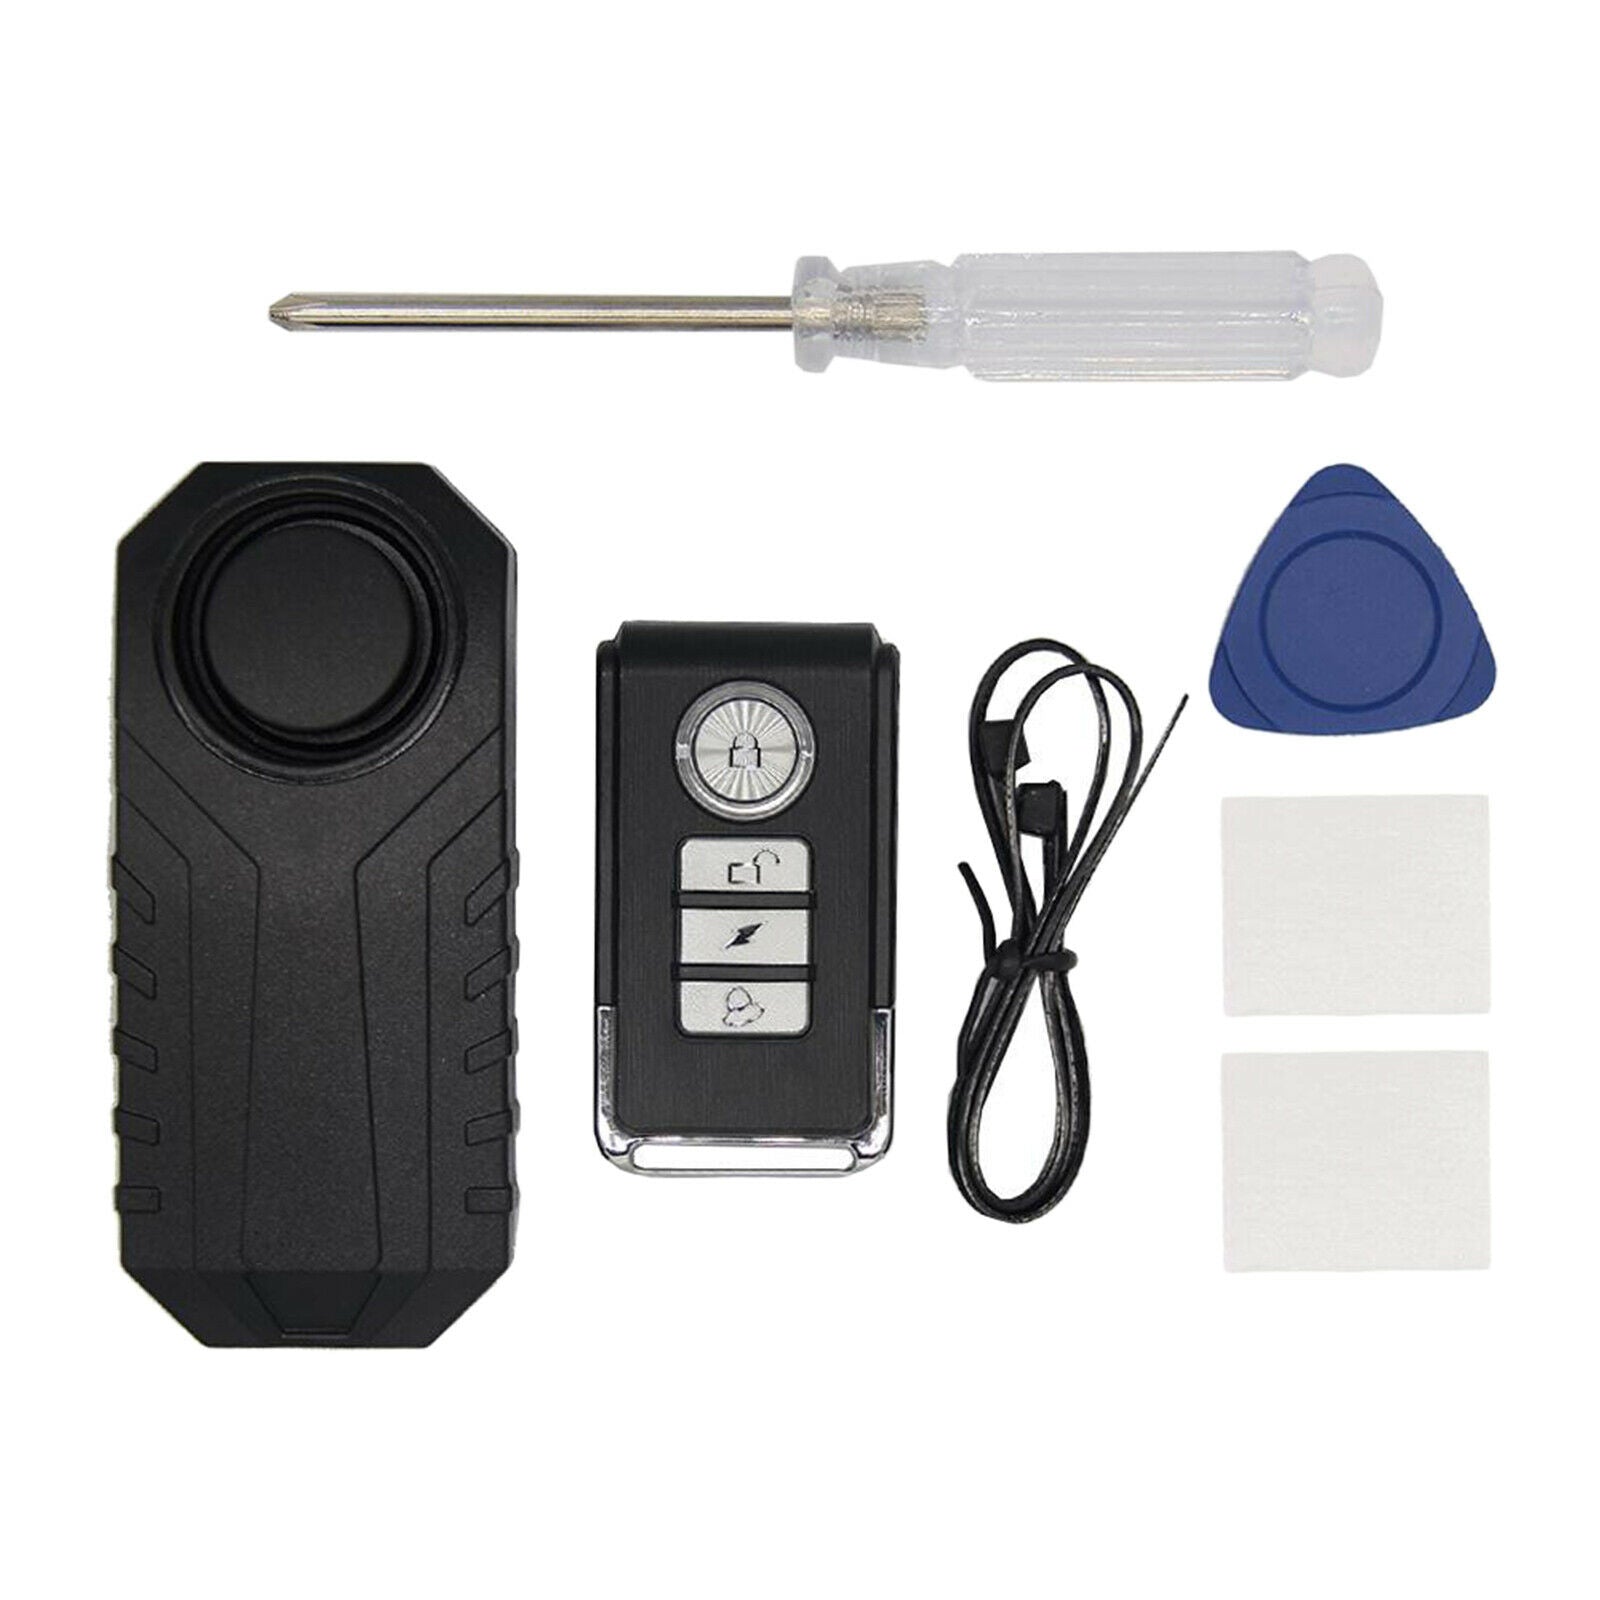 Bike Alarm with Remote, Wireless Anti-Theft Vibration Motorcycle 7 Level